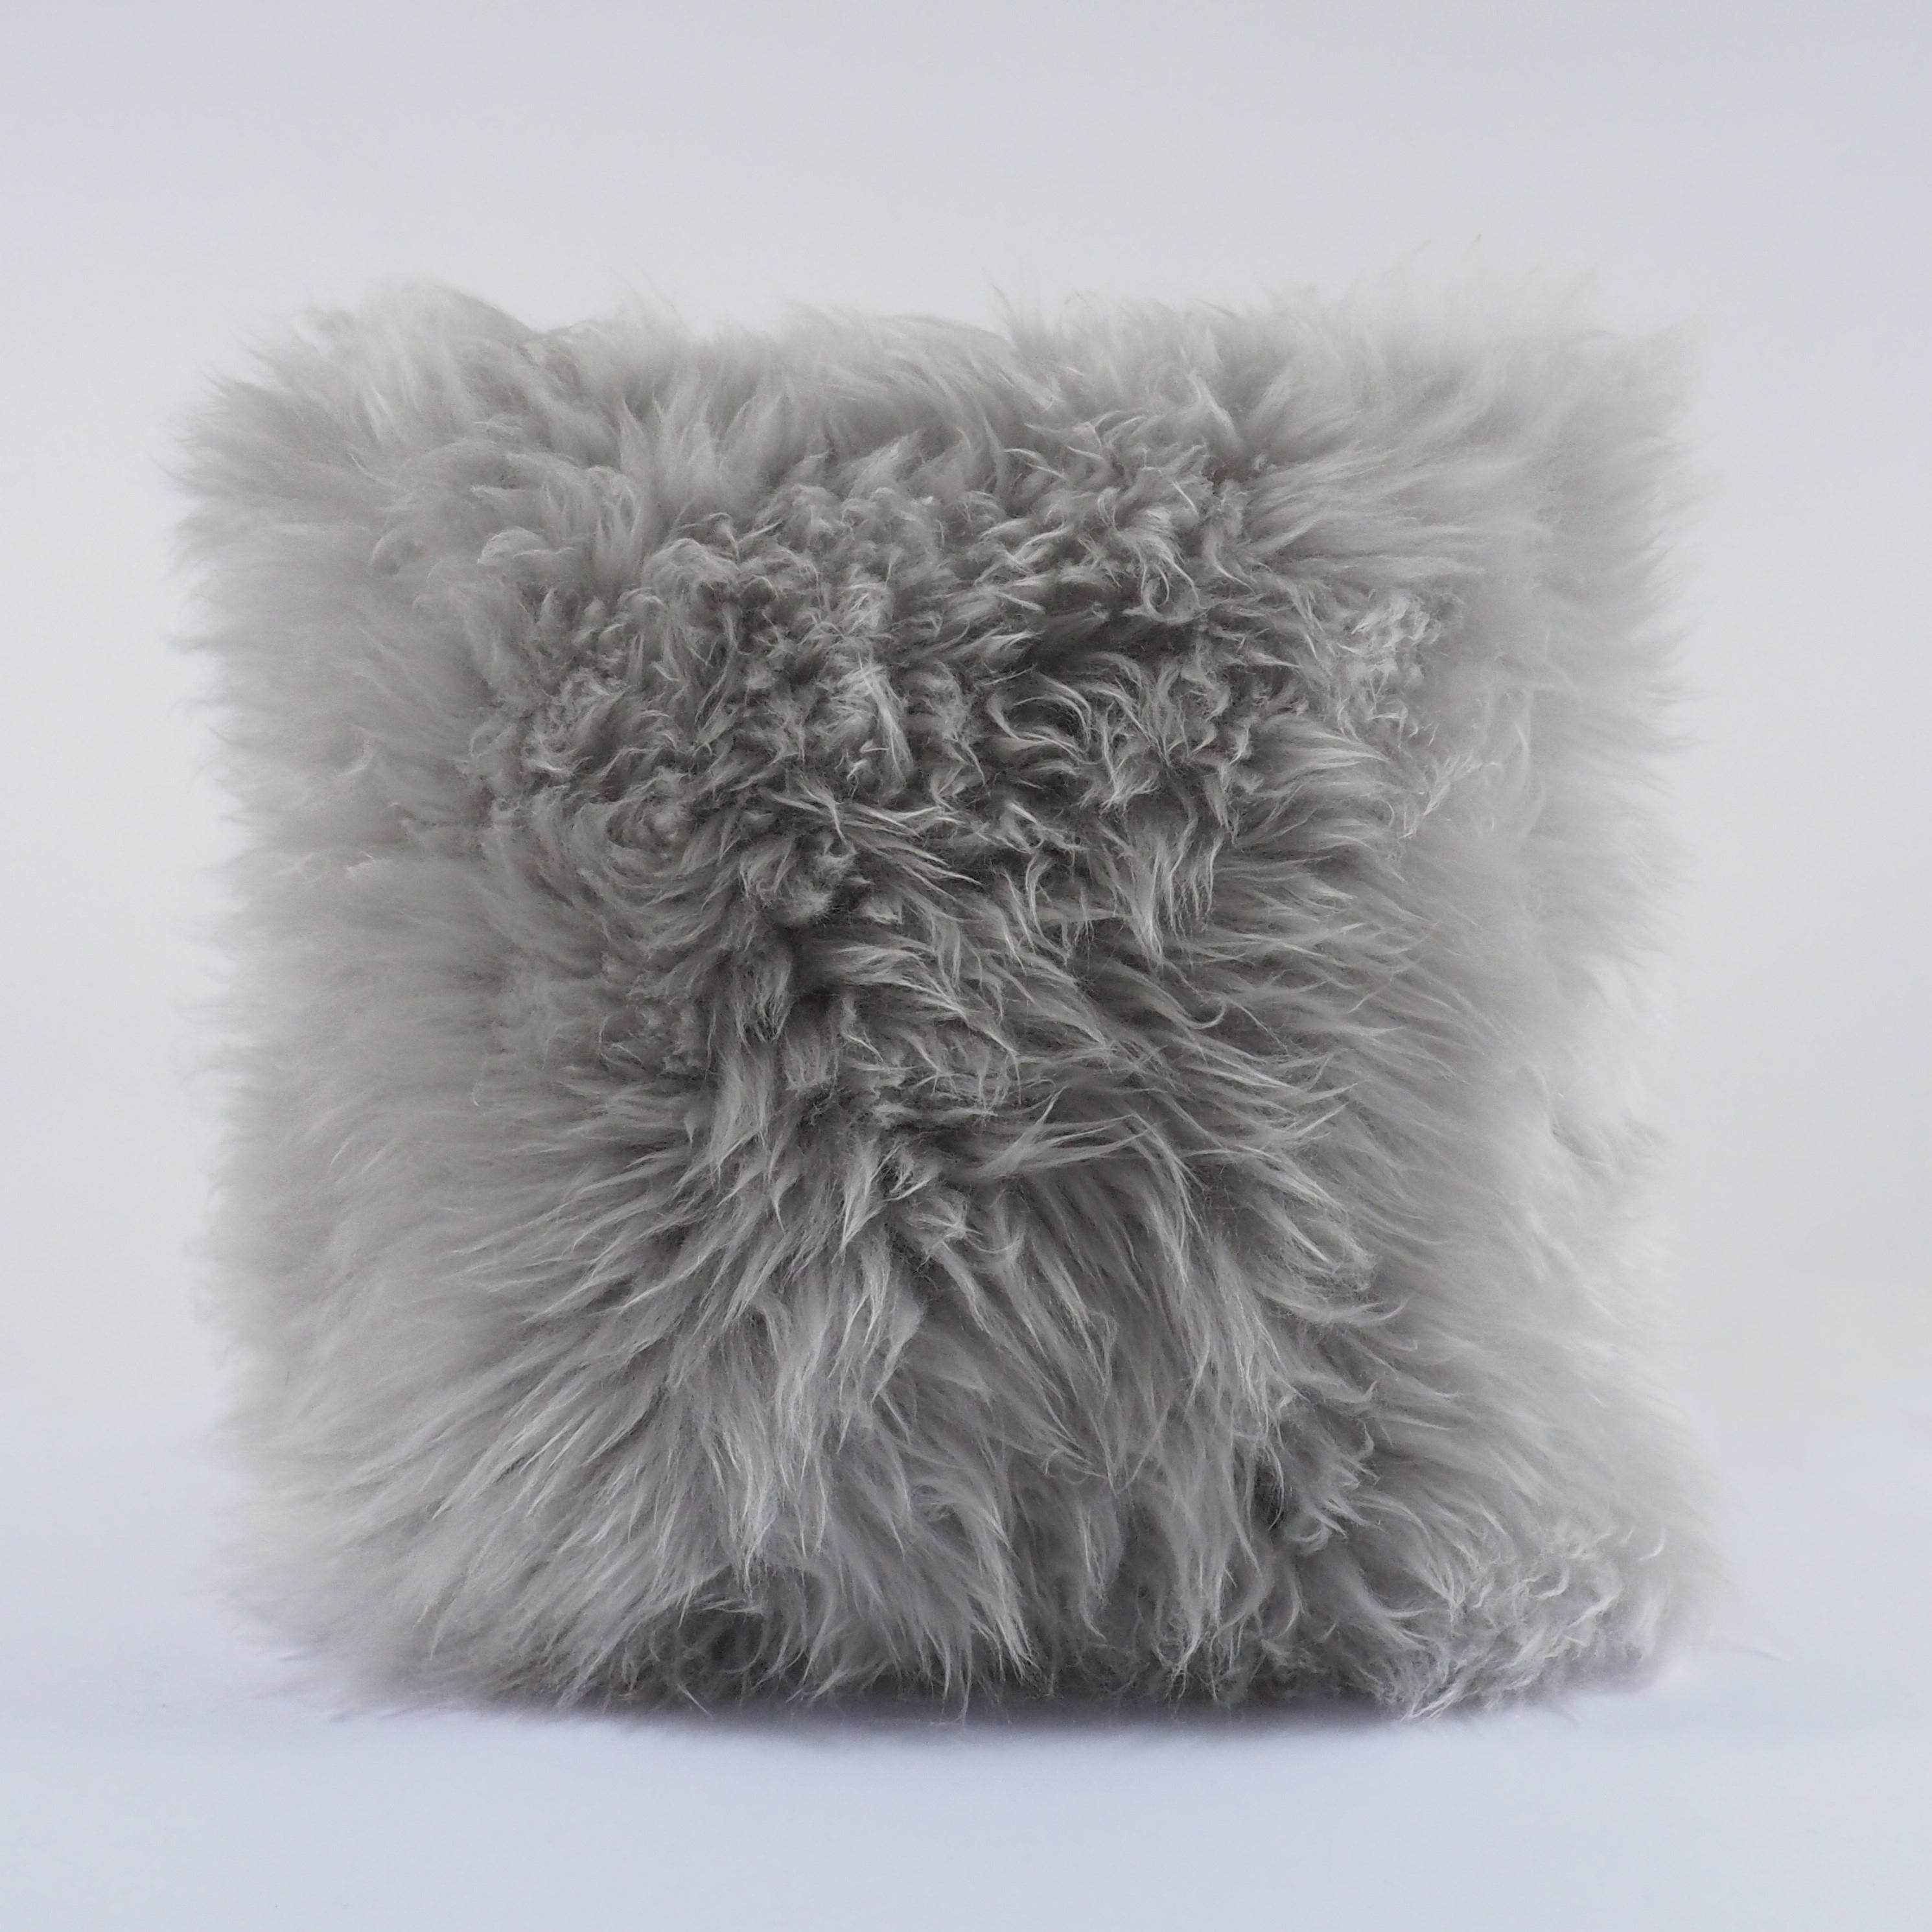 Alps Light Grey Shearling Sheepskin Pillow Fluffy Cushion by Muchi Decor In New Condition For Sale In Poviglio, IT